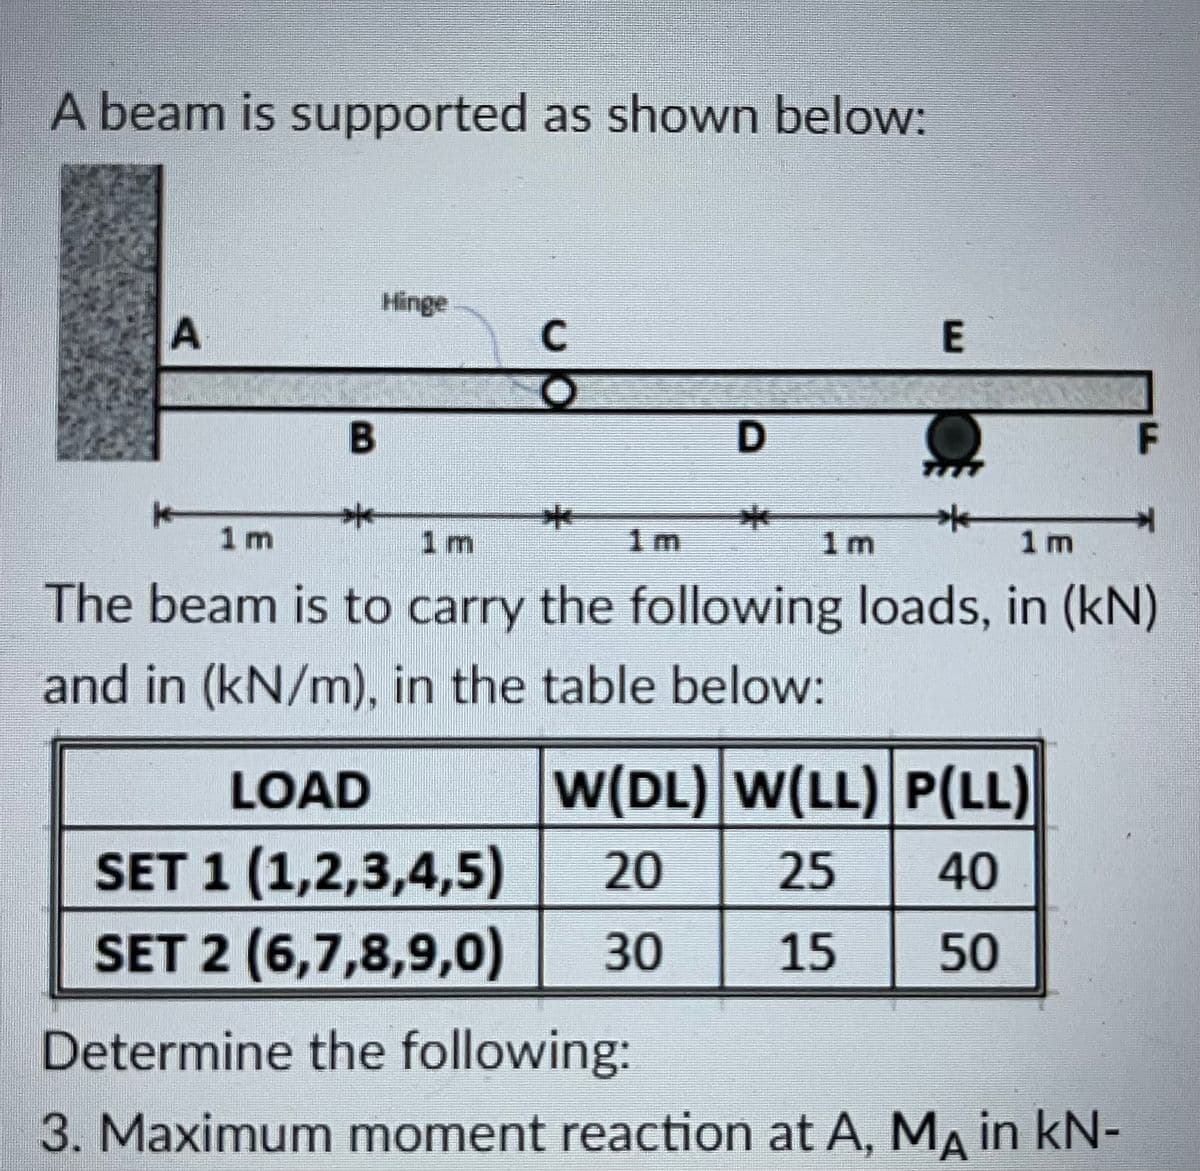 A beam is supported as shown below:
Hinge
C
E
D
1 m
1 m
1 m
1m
1 m
The beam is to carry the following loads, in (kN)
and in (kN/m), in the table below:
LOAD
W(DL) W(LL) P(LL)
SET 1 (1,2,3,4,5)
SET 2 (6,7,8,9,0)
20
25
40
30
15
50
Determine the following:
3. Maximum moment reaction at A, MA in kN-
